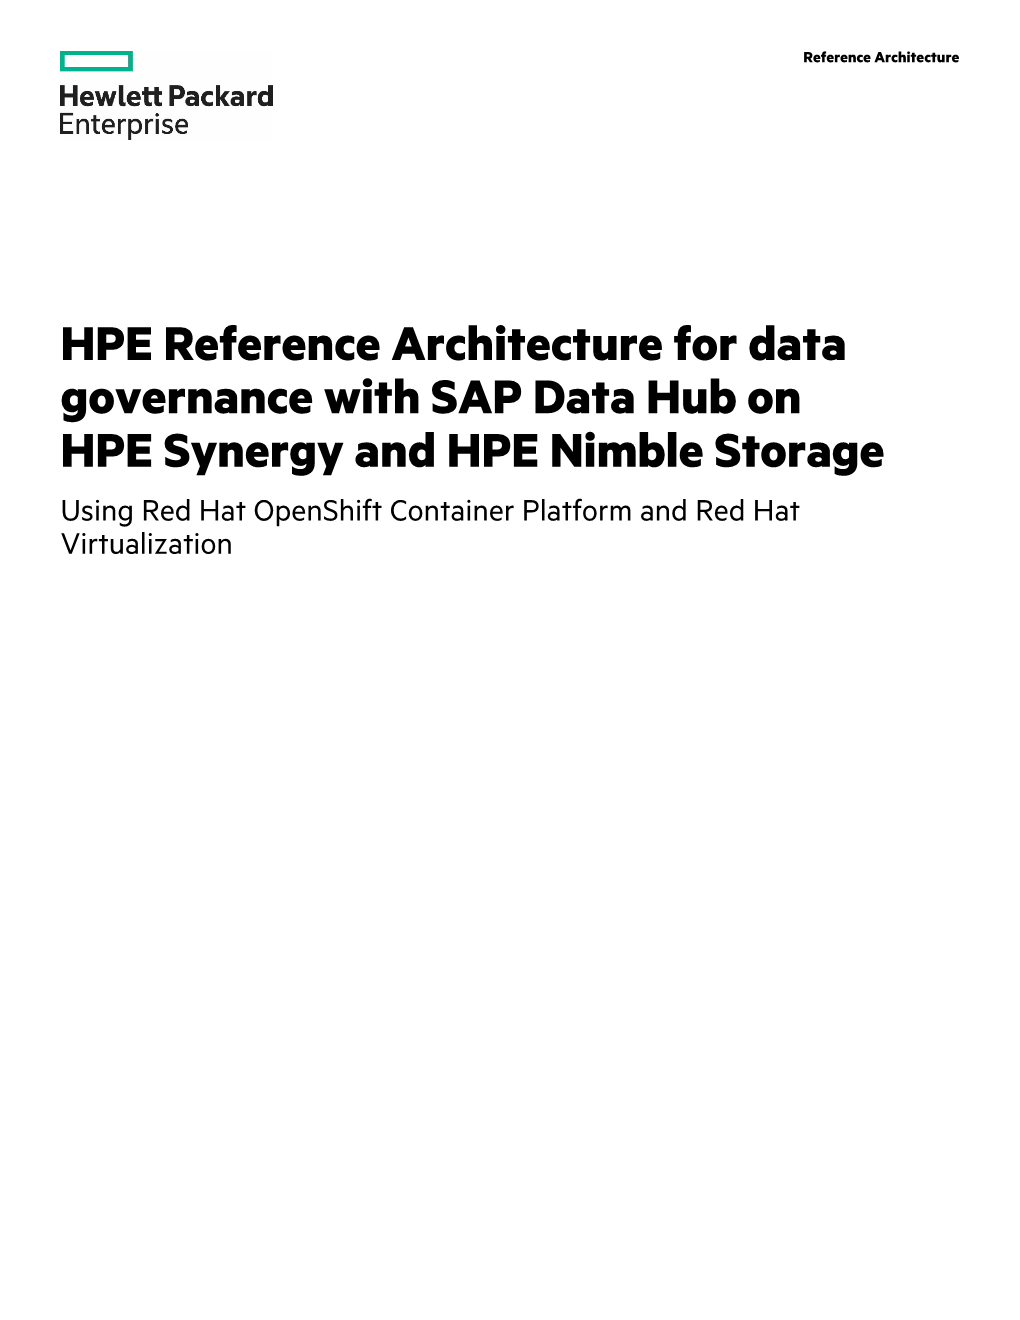 HPE Reference Architecture for Data Governance with SAP Data Hub on HPE Synergy and HPE Nimble Storage